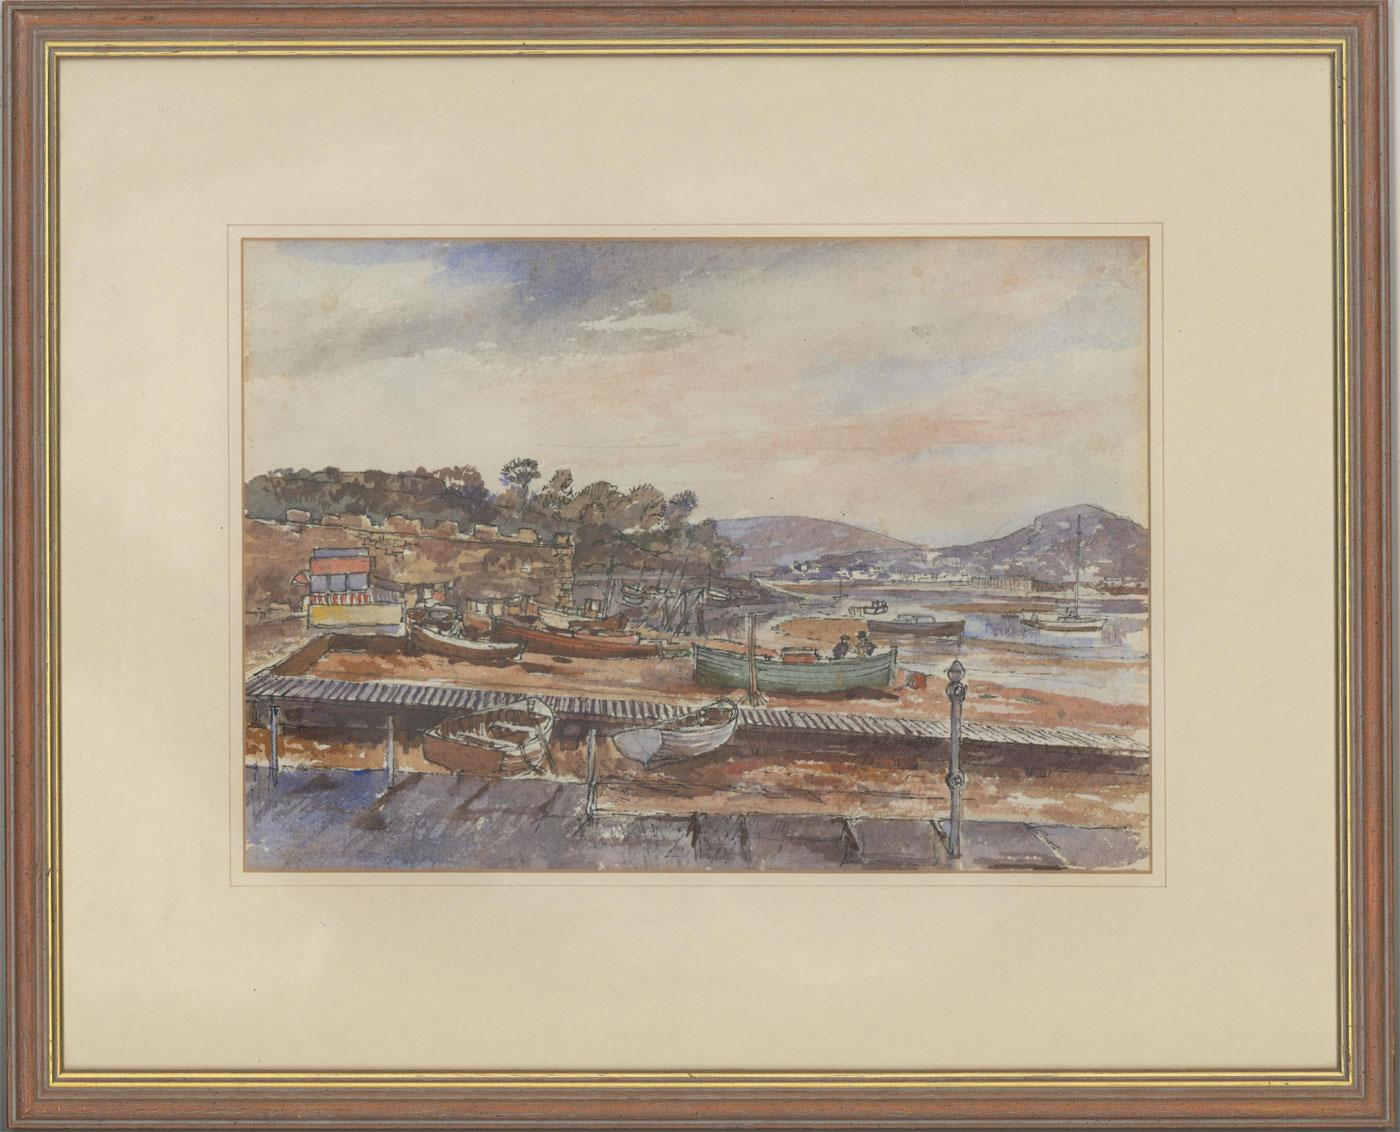 A finely detailed colourful watercolour with pen and ink details, depicting the harbour at Conwy, North Wales, by the listed artist Alfred Burgess Sharrocks PRCamA (1919-1988). Well-presented in a wooden frame with gilt detail. Inscribed on the